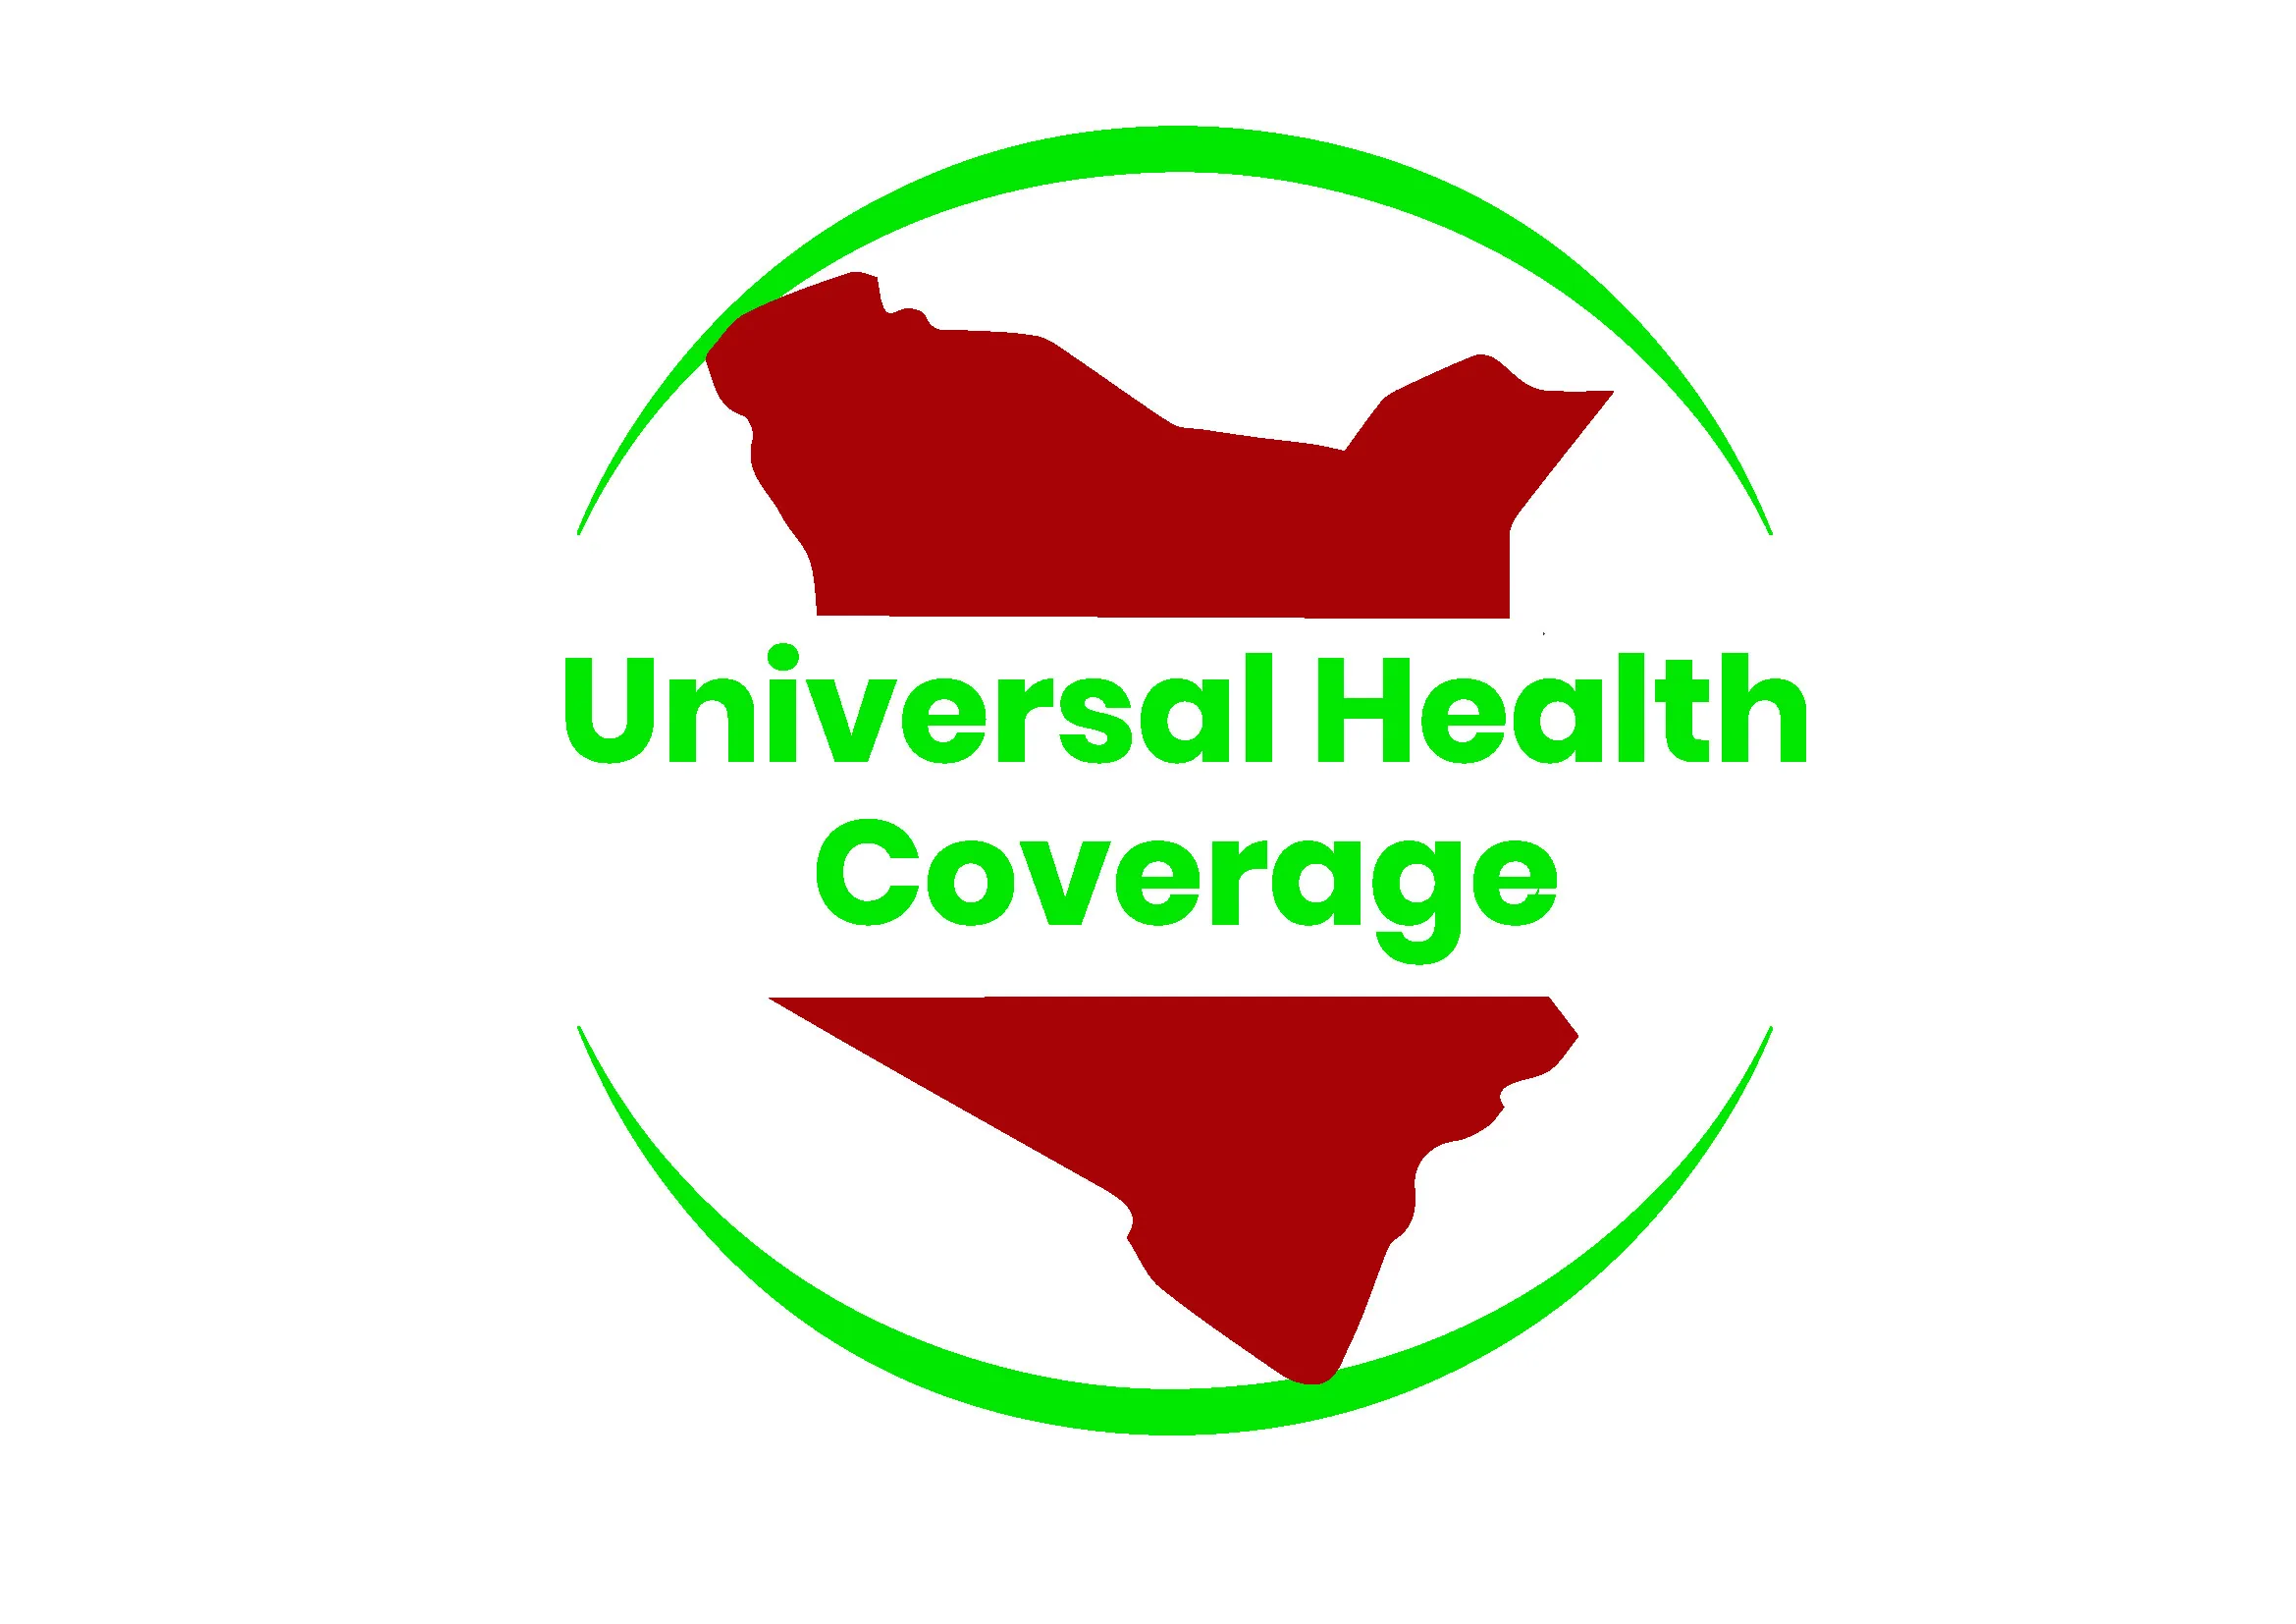 Universal Health Coverage (UHC) in Kenya will collapse unless our health budgeting is improved